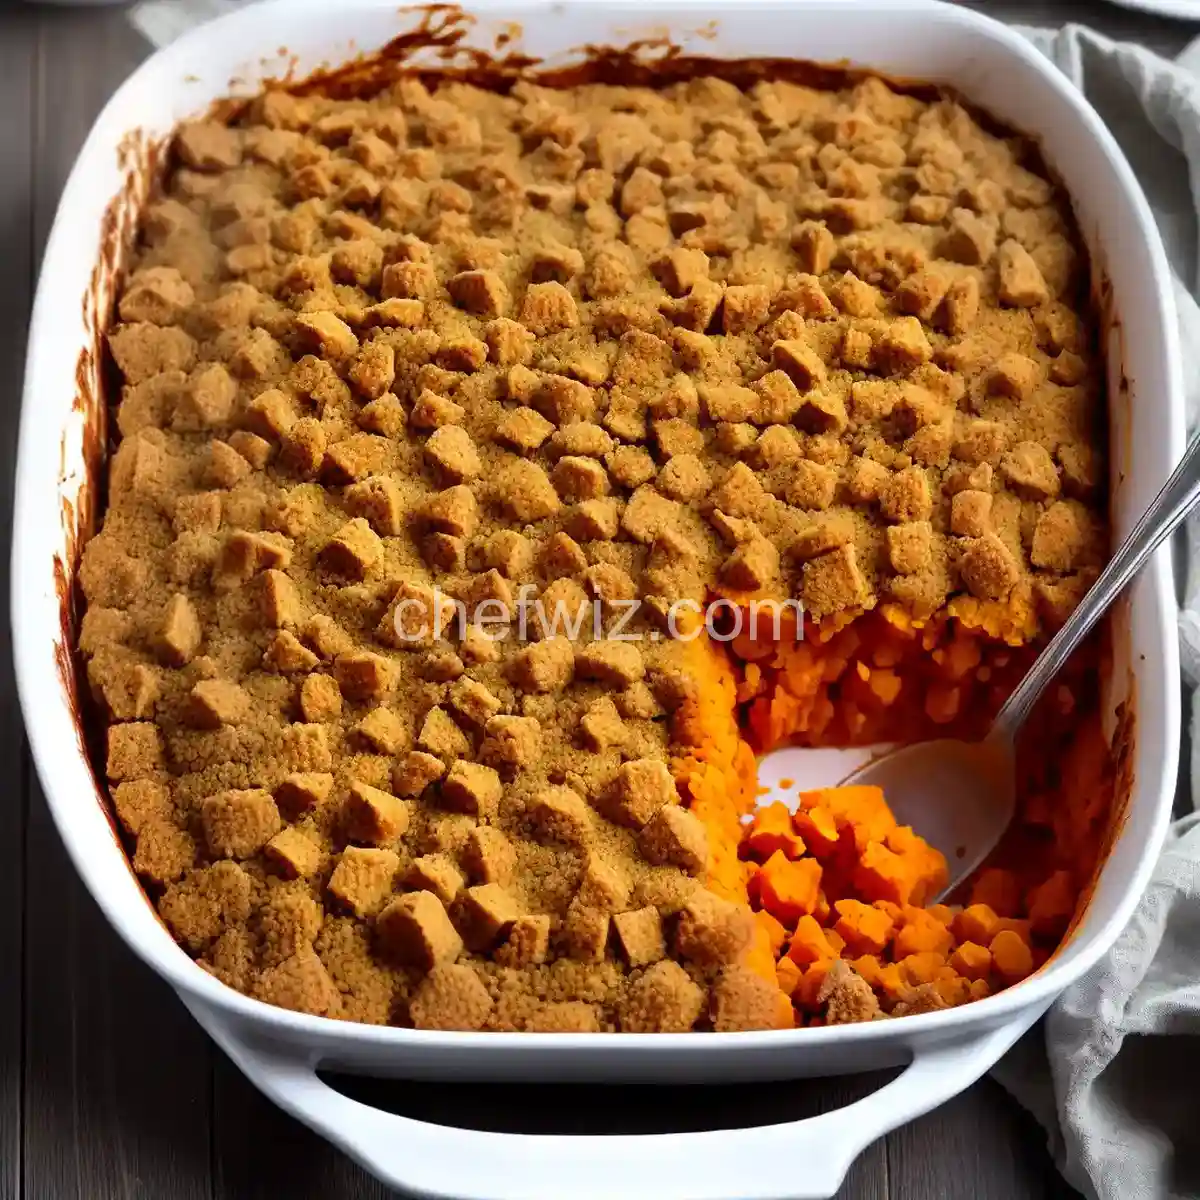 Yummy Sweet Potato Casserole - Recipes. Food. Cooking. Eating. Dinner ...